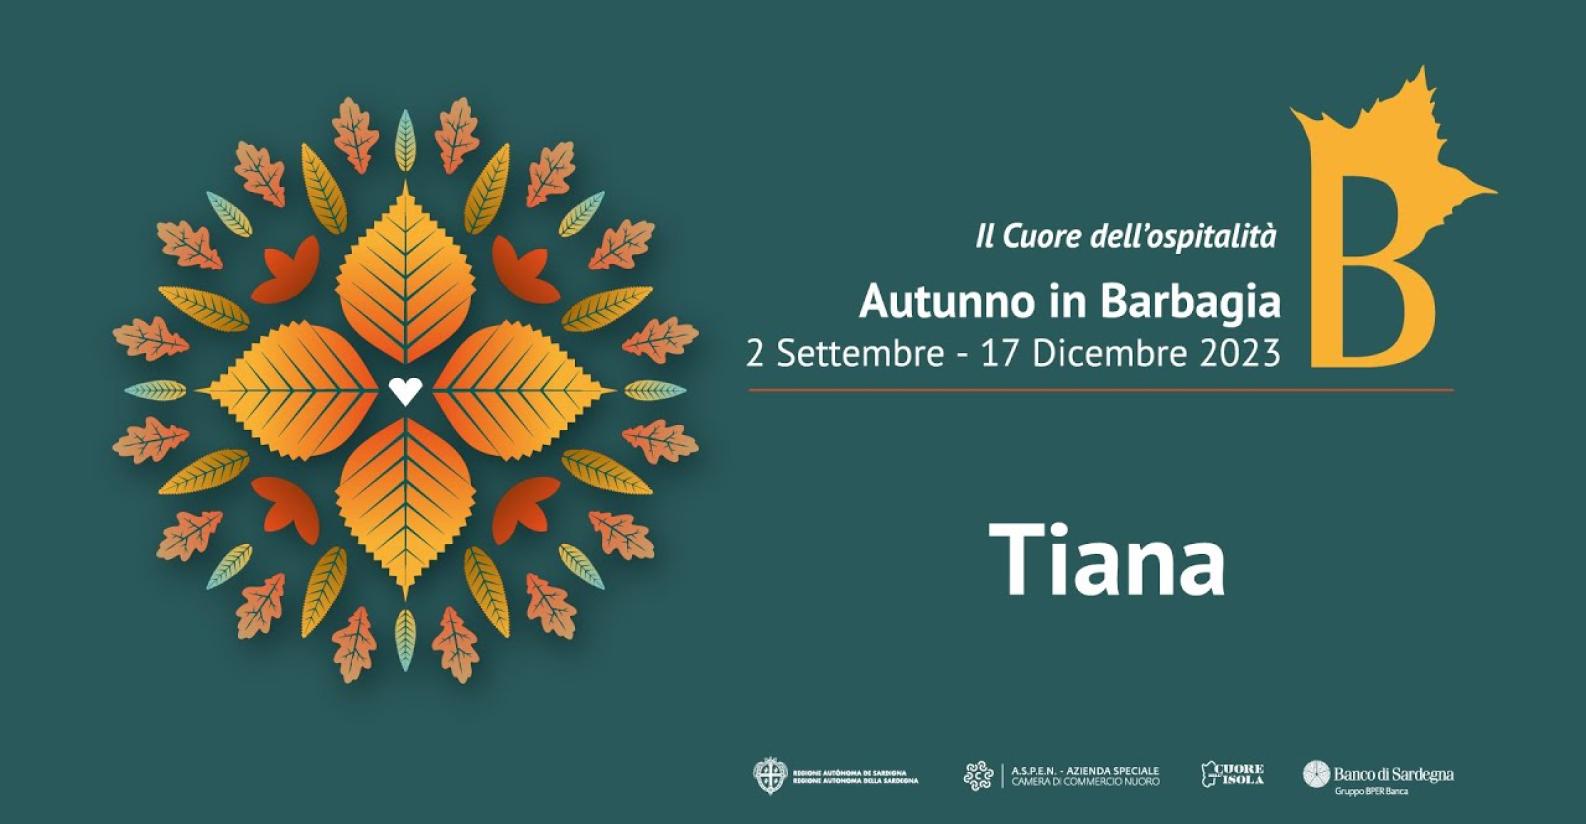 Autunno in Barbagia 2023 - Tiana